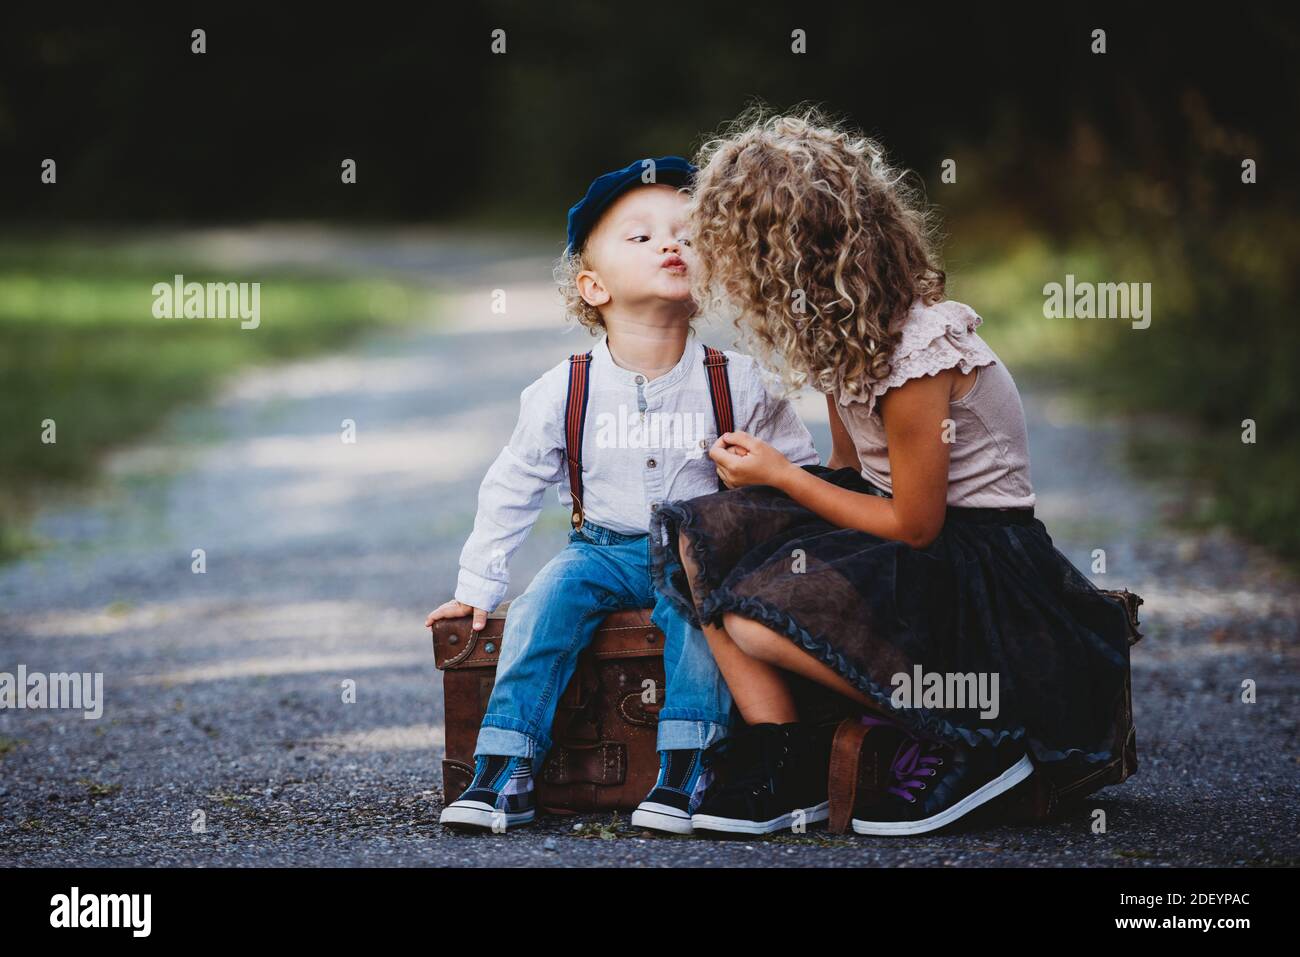 Adorable children siting on a vintage suitcase throwing a kiss Stock Photo